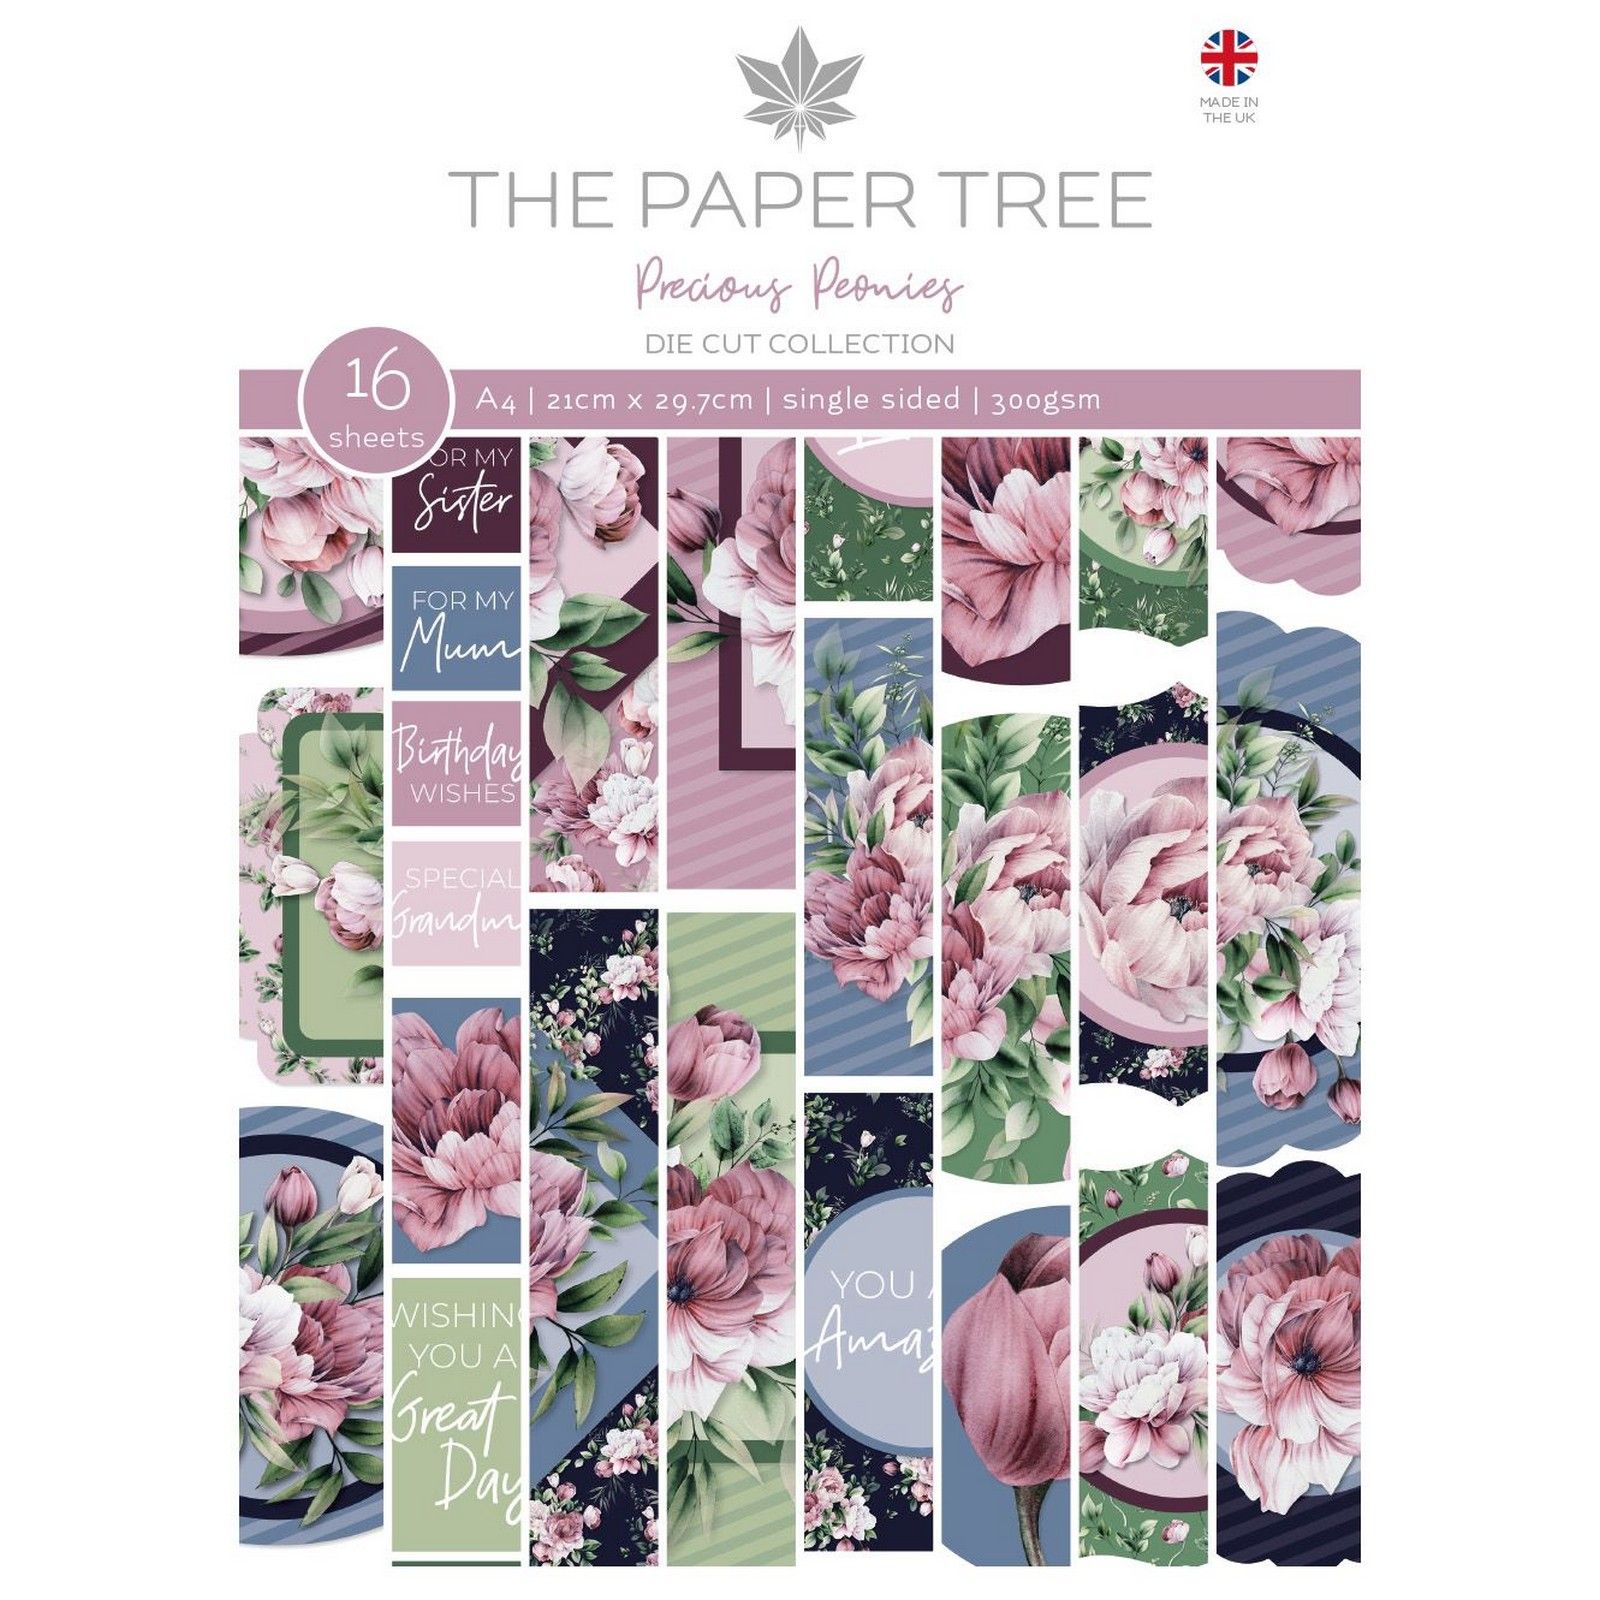 The Paper Tree • Precious Peonies Die Cut Collection